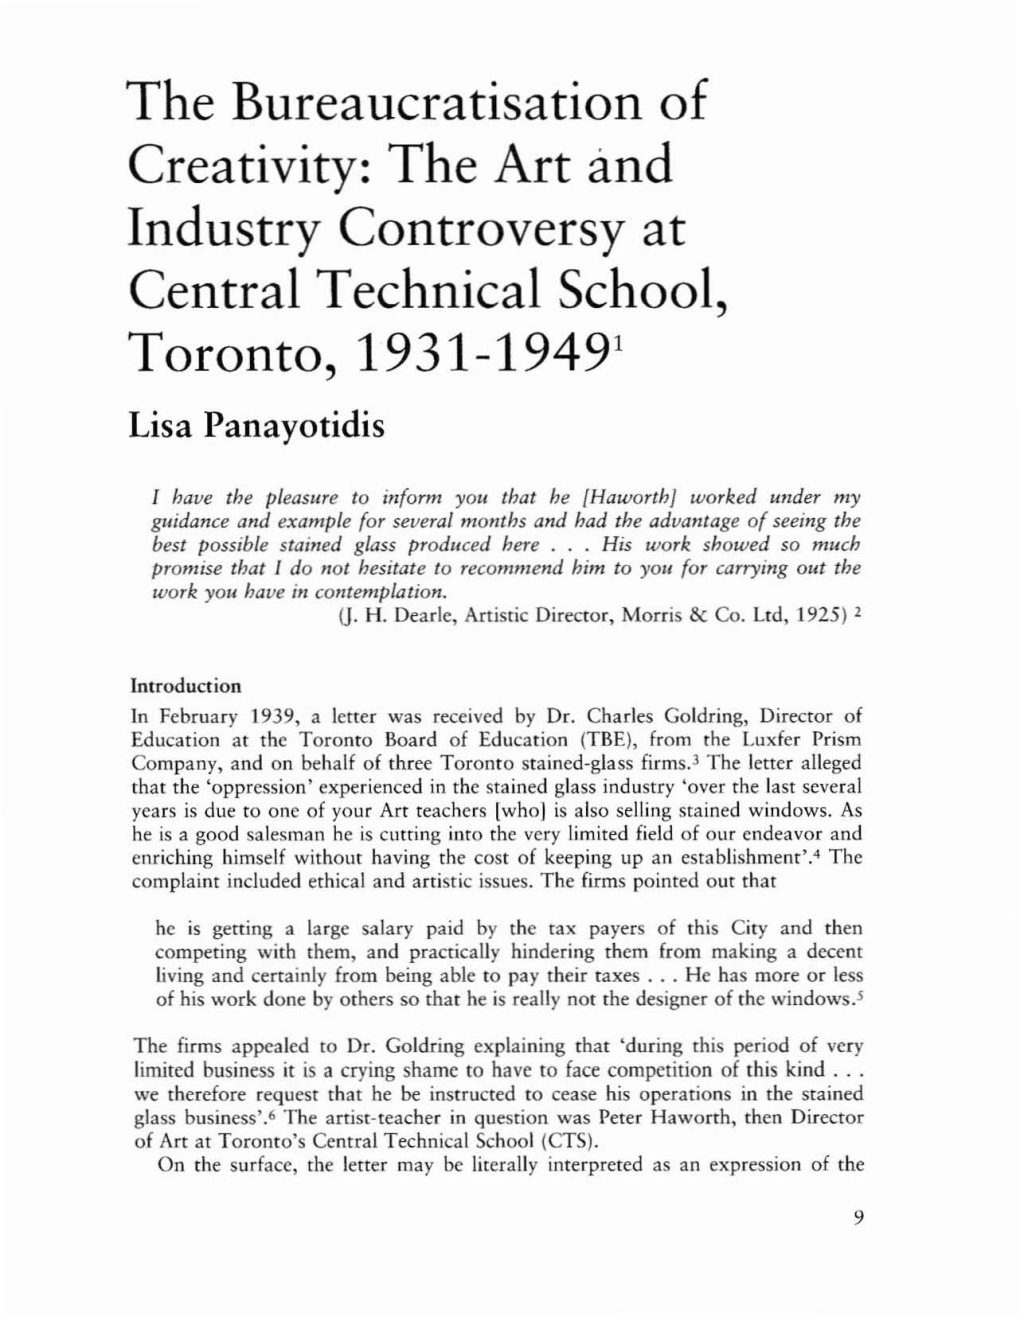 The Bureaucratisation of Creativity: the Art and Industry Controversy at Central Technical School, Toronto, 1931-19491 Lisa Panayotidis